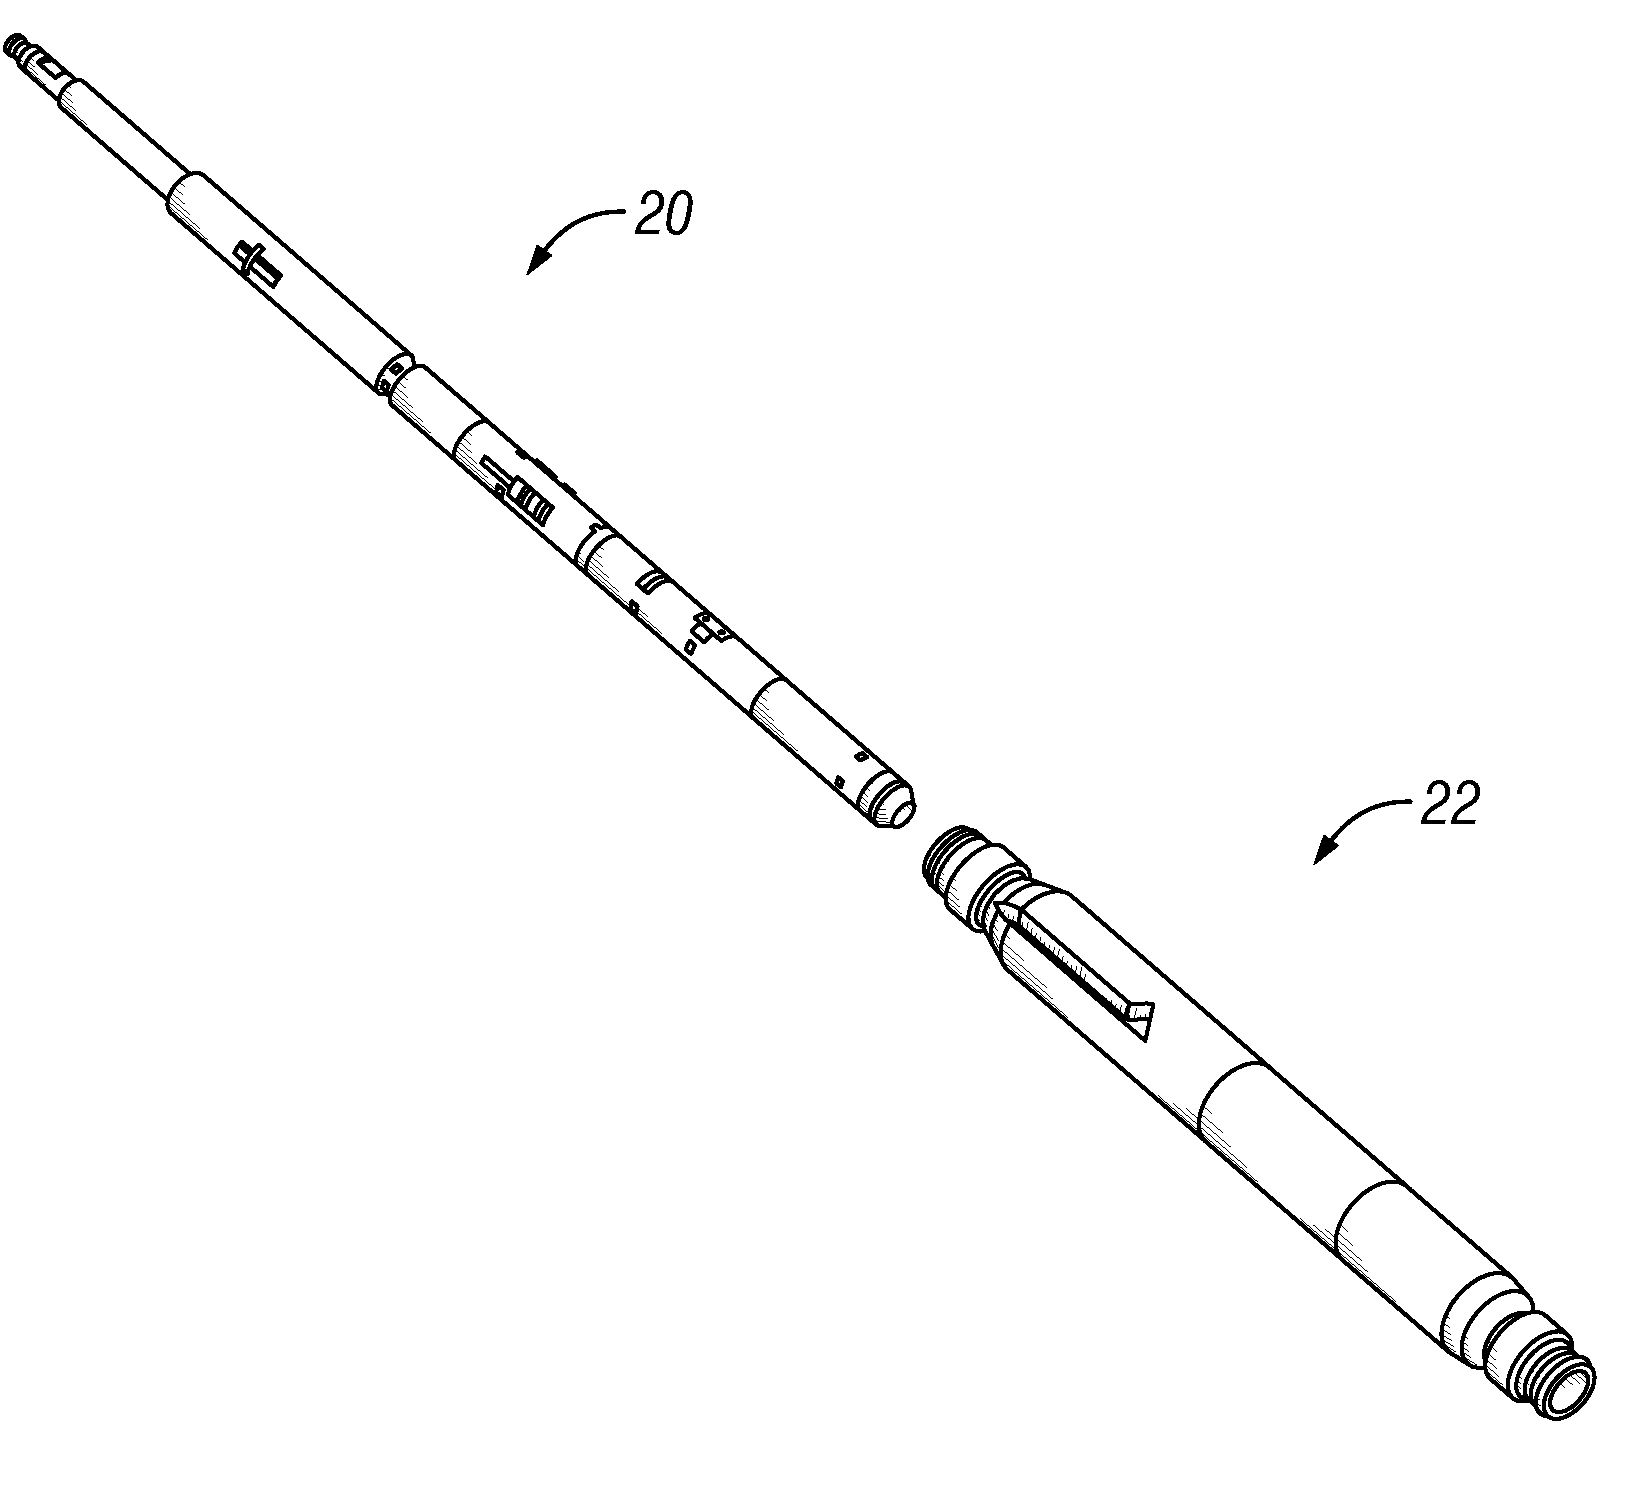 Radial indexing communication tool and method for subsurface safety valve with communication component